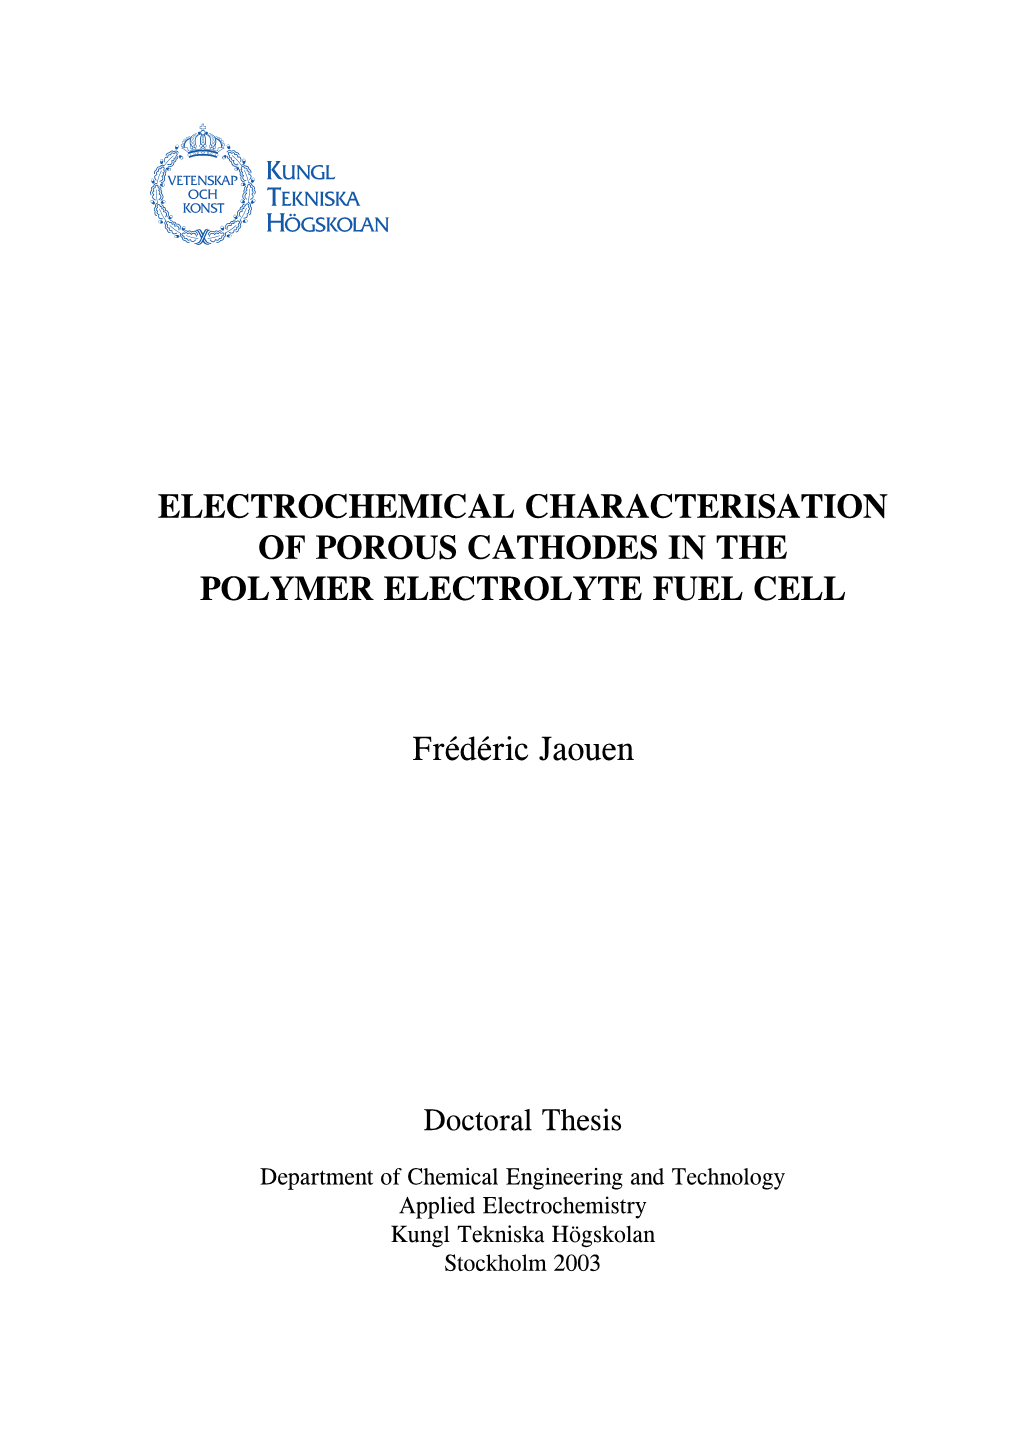 Electrochemical Characterisation of Porous Cathodes in the Polymer Electrolyte Fuel Cell